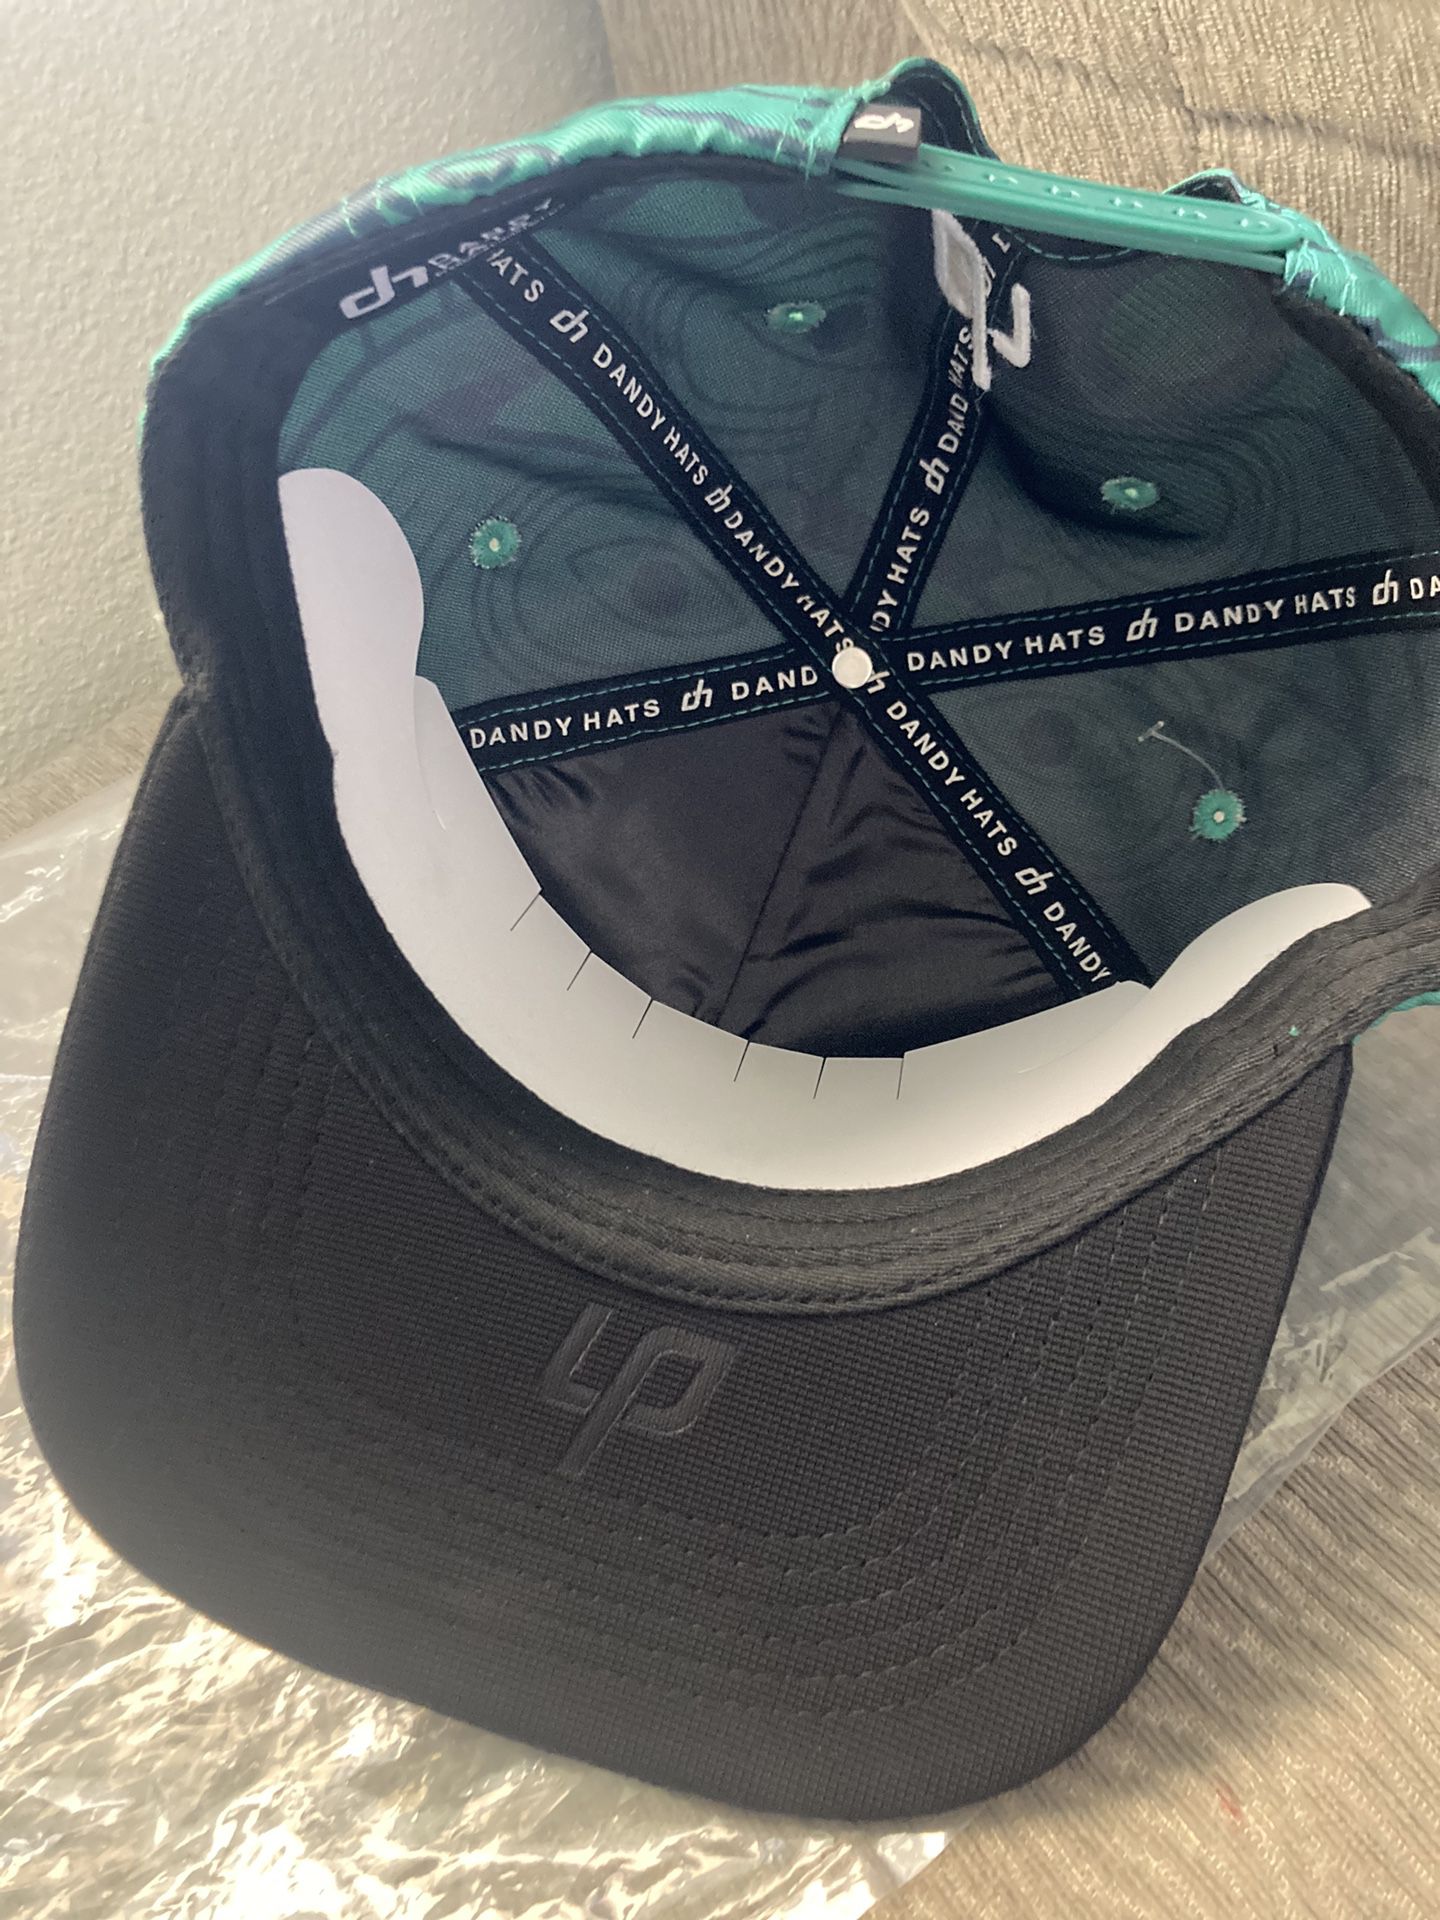 DS SUPREME FW18 PREACH MESH BACK 5-PANEL WOODLAND CAMO HAT for Sale in Los  Angeles, CA - OfferUp